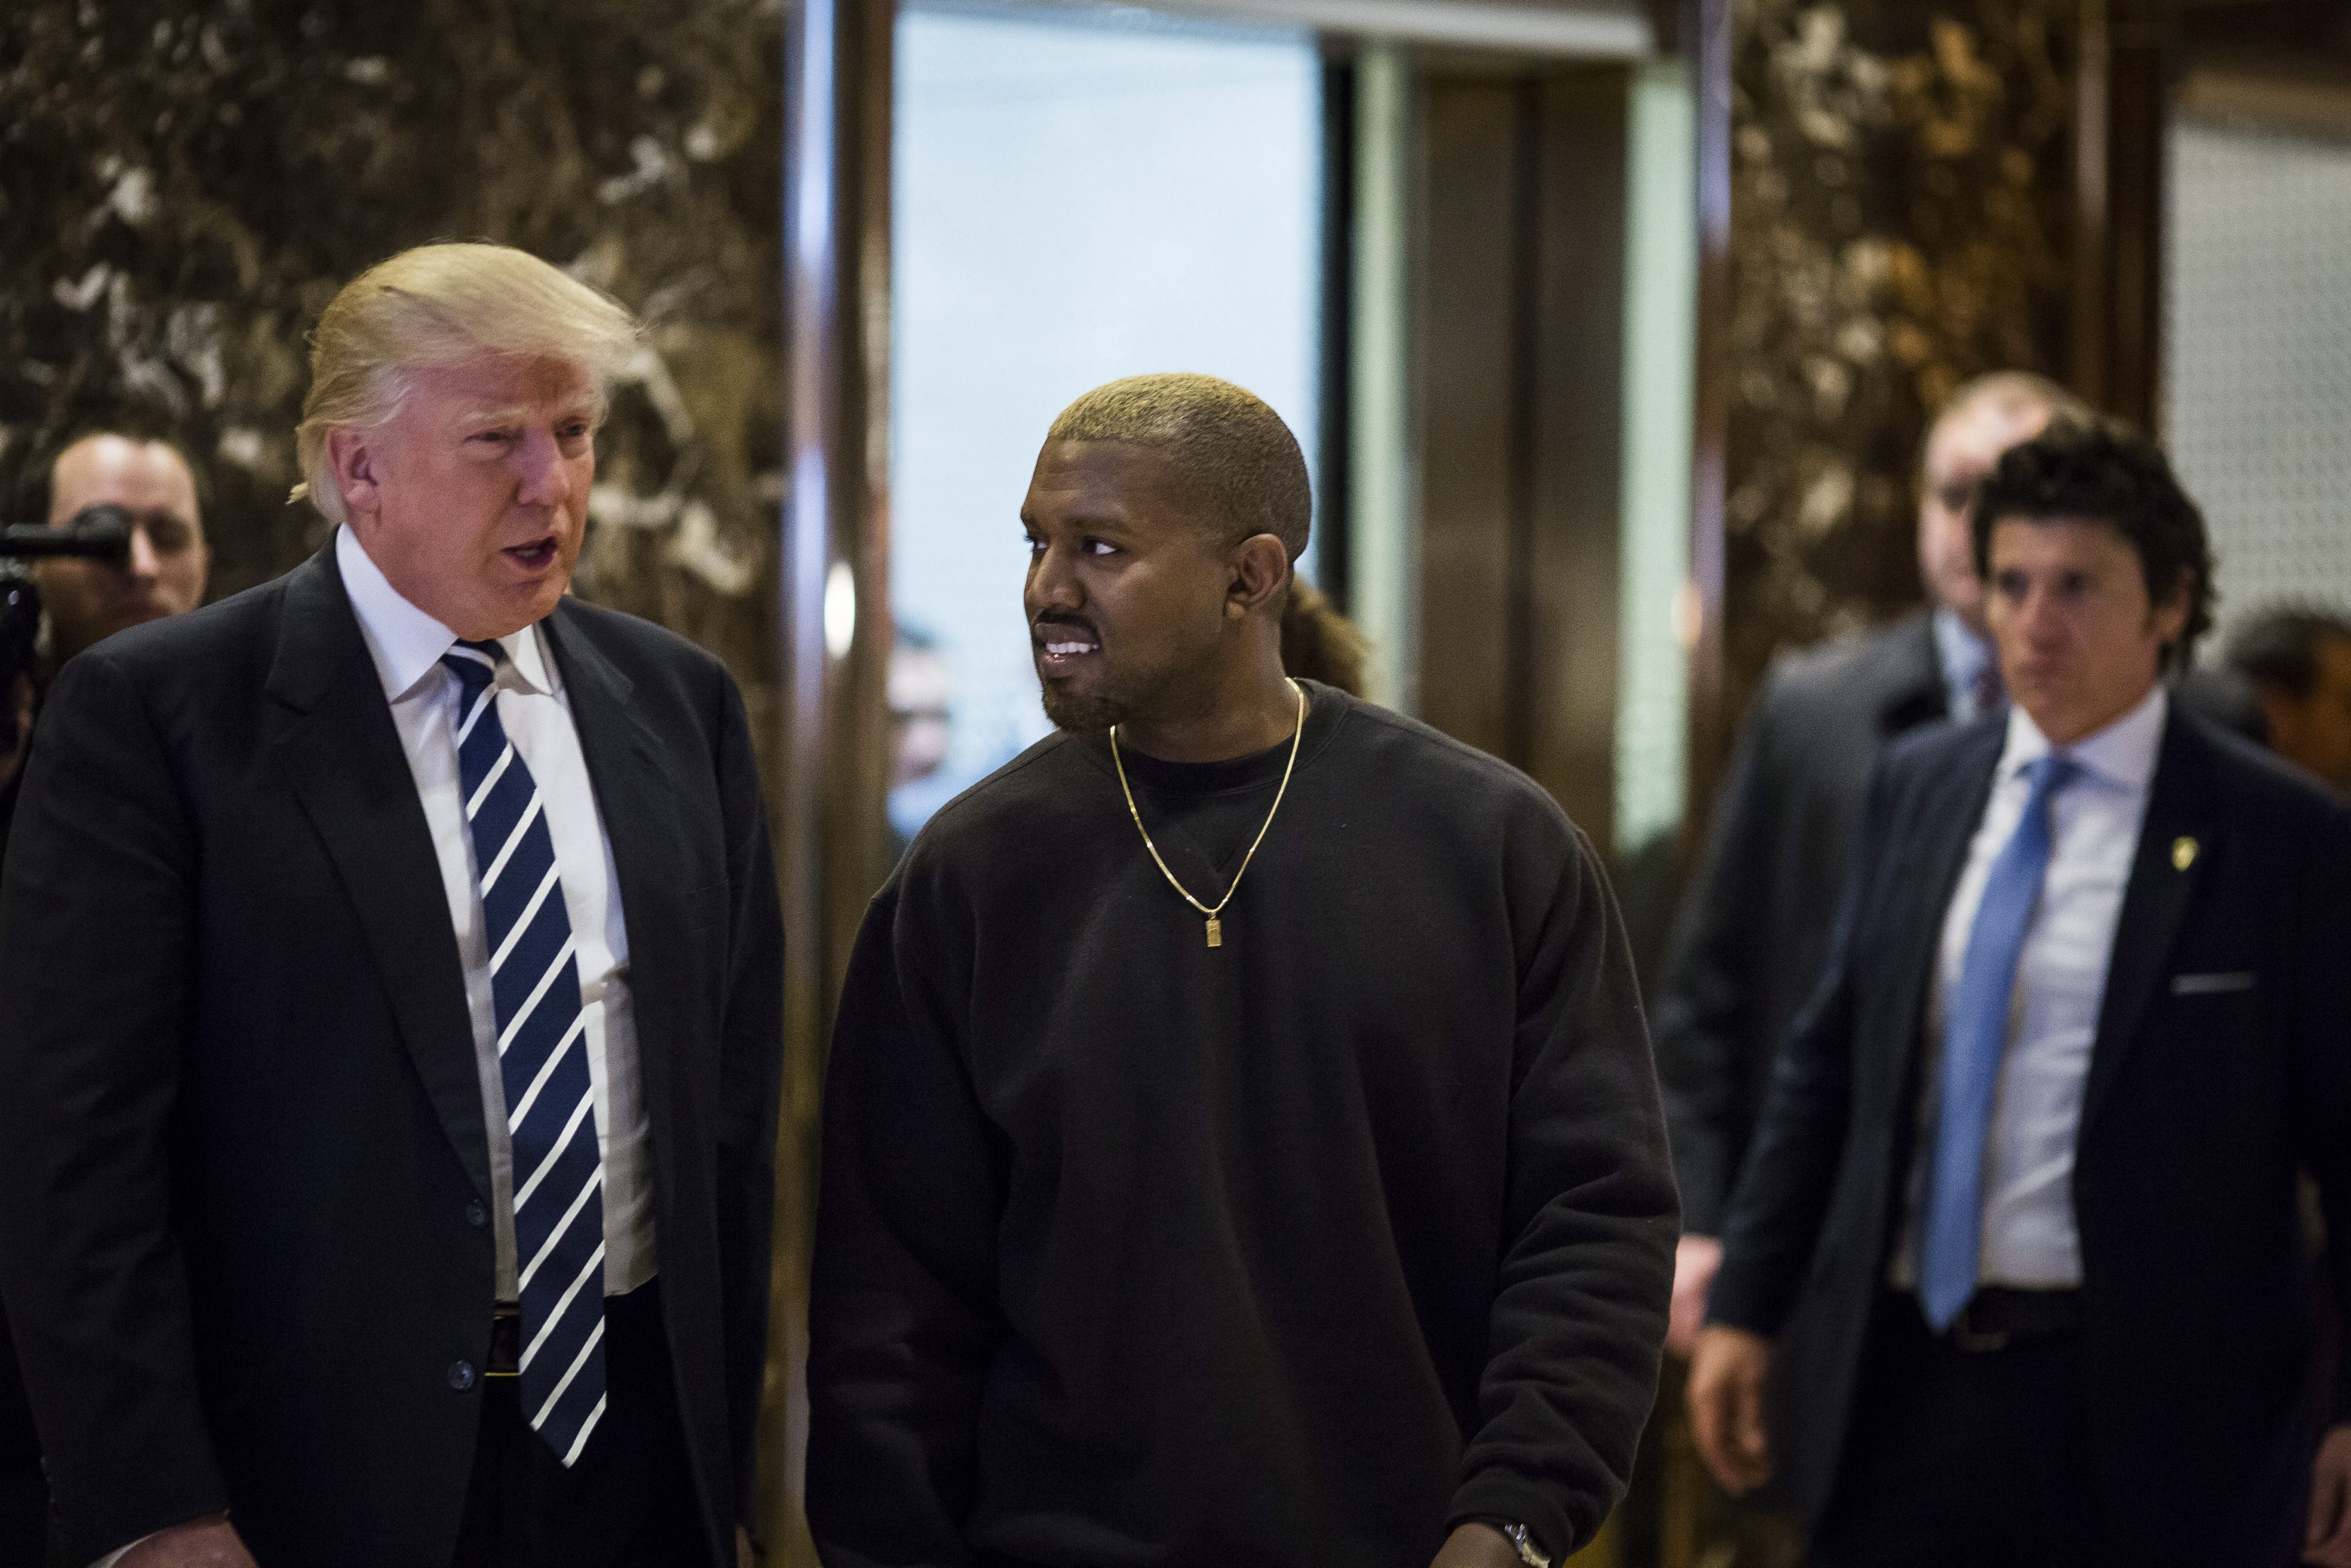 2016-12-13 09:36:51 epa05674084 US President-elect Donald J. Trump and US musician Kanye West (L) pose for photographers in the lobby of Trump Tower in Manhattan, New York, USA, 13 December 2016. The US President-elect Donald Trump is holding meetings at Trump Tower as he continues to fill in key positions in his new administration. EPA/JOHN TAGGART / POOL